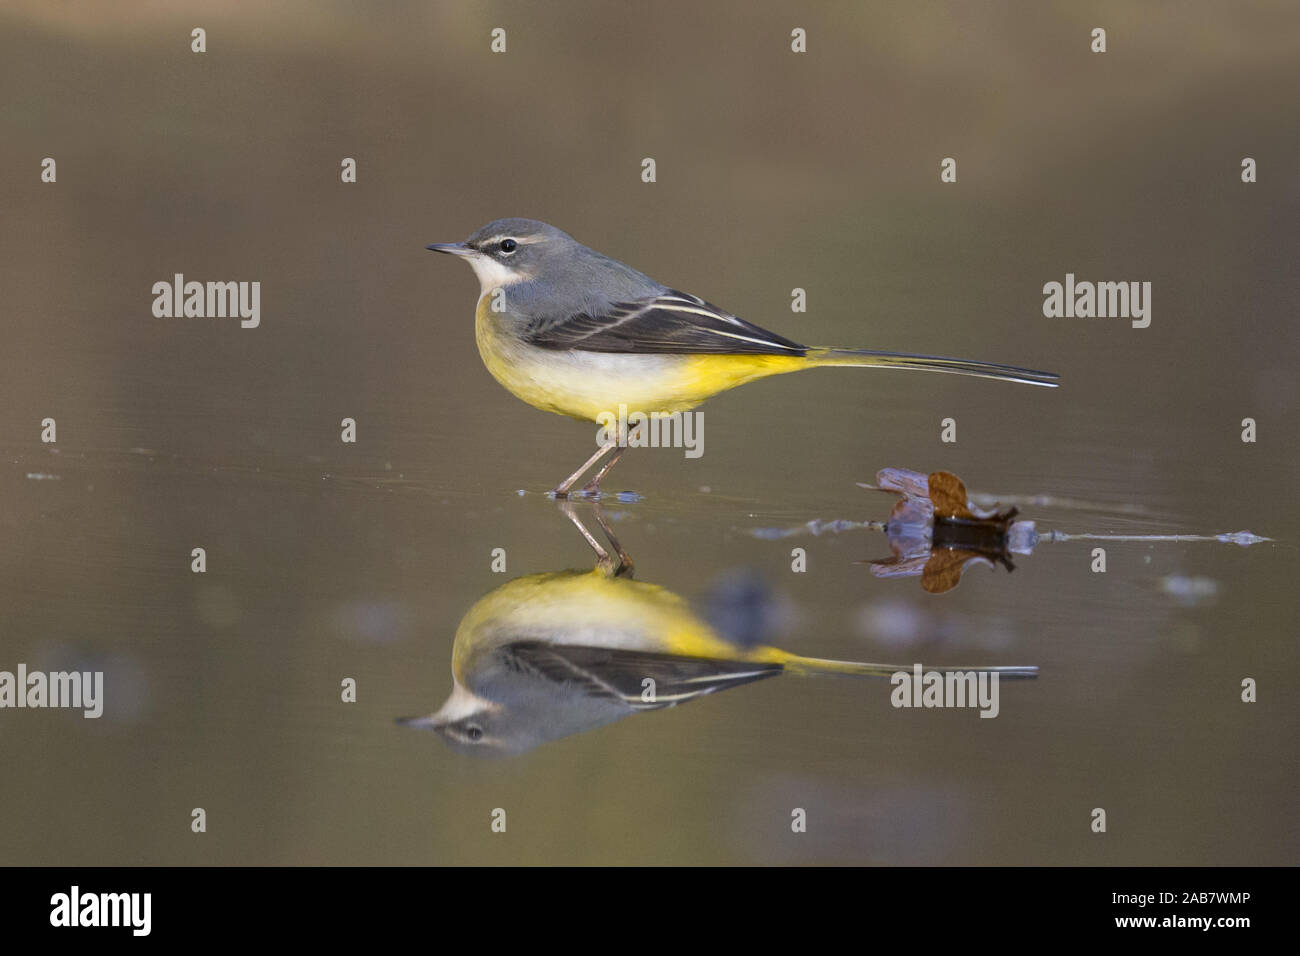 Grey Wagtail (Motacilla cinerea) adult male, non breeding plumage, standing in shallow water with reflection, Suffolk, England, November Stock Photo